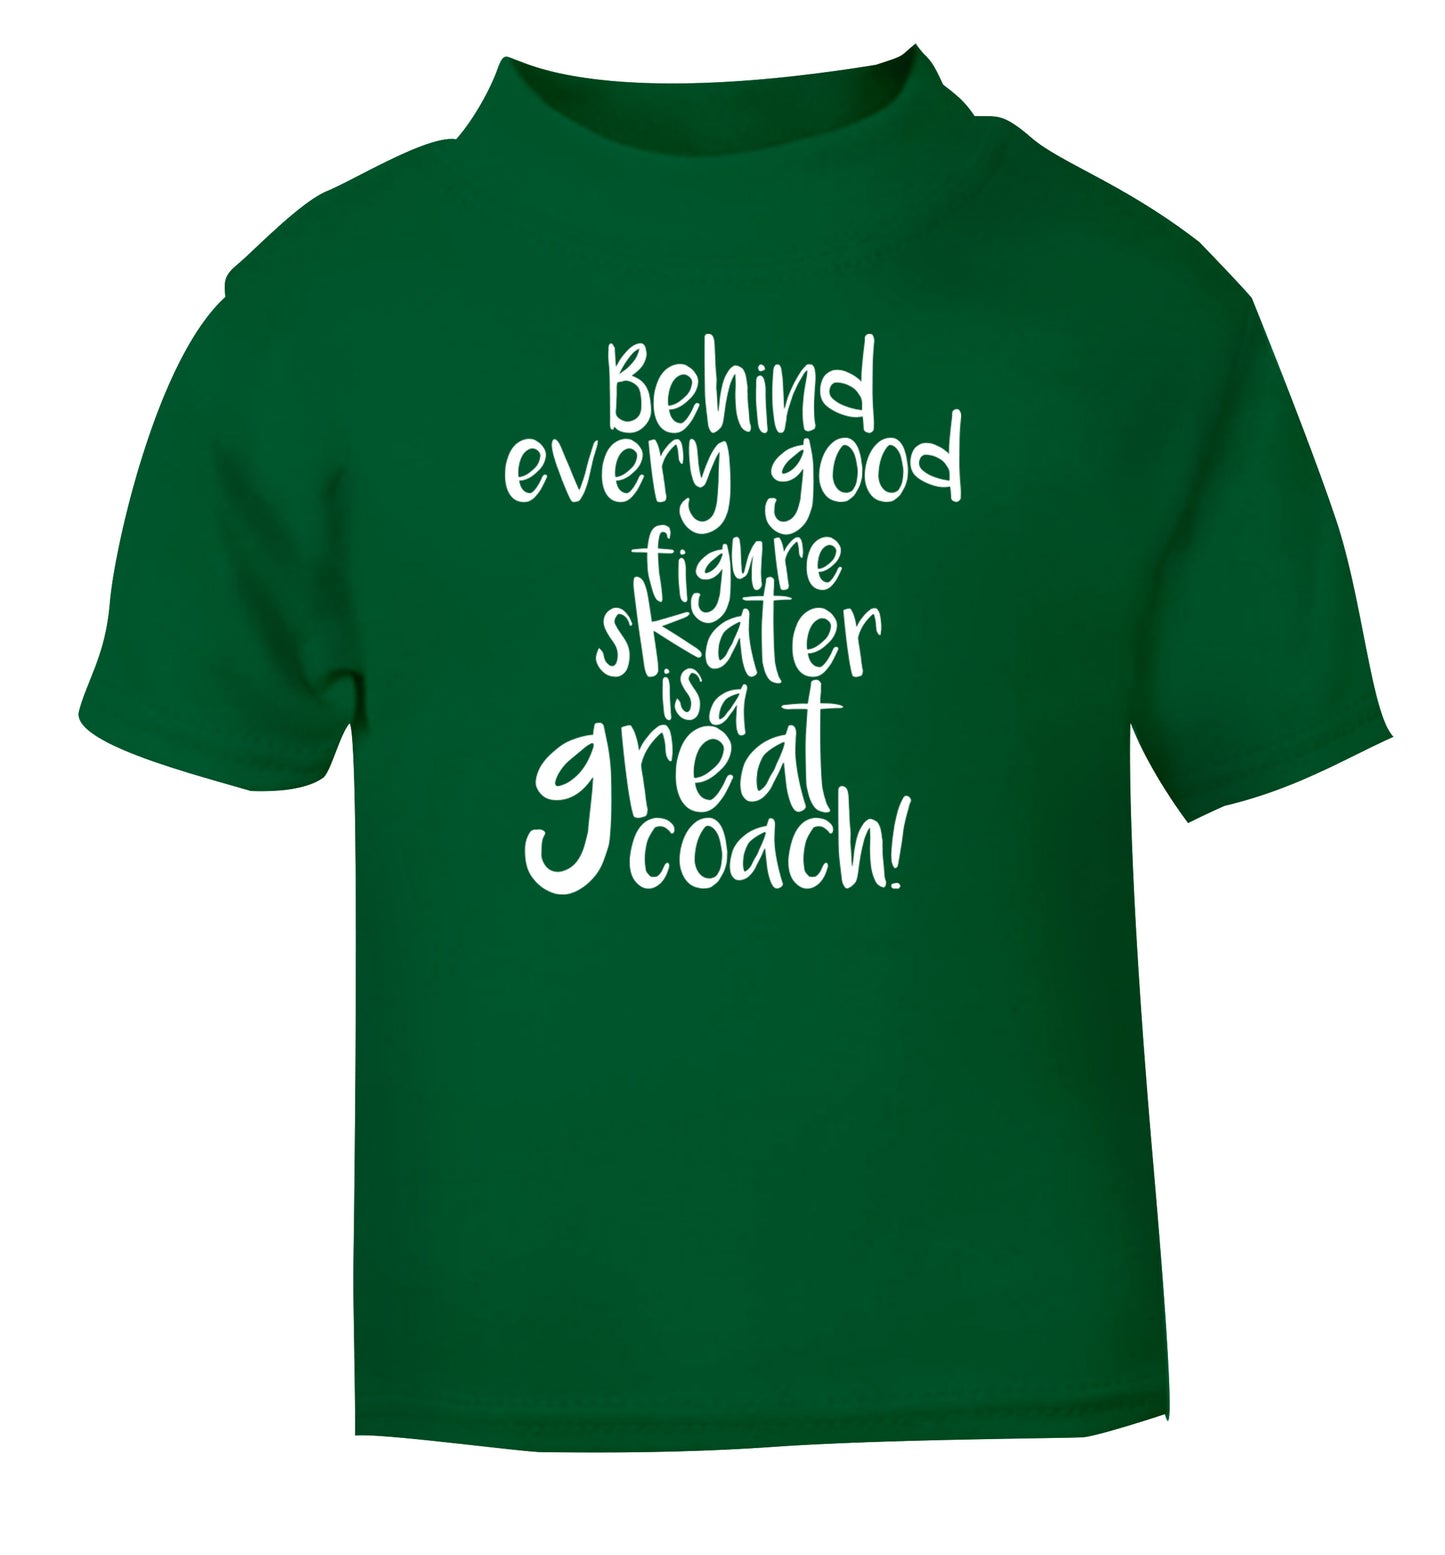 Behind every good figure skater is a great coach green Baby Toddler Tshirt 2 Years